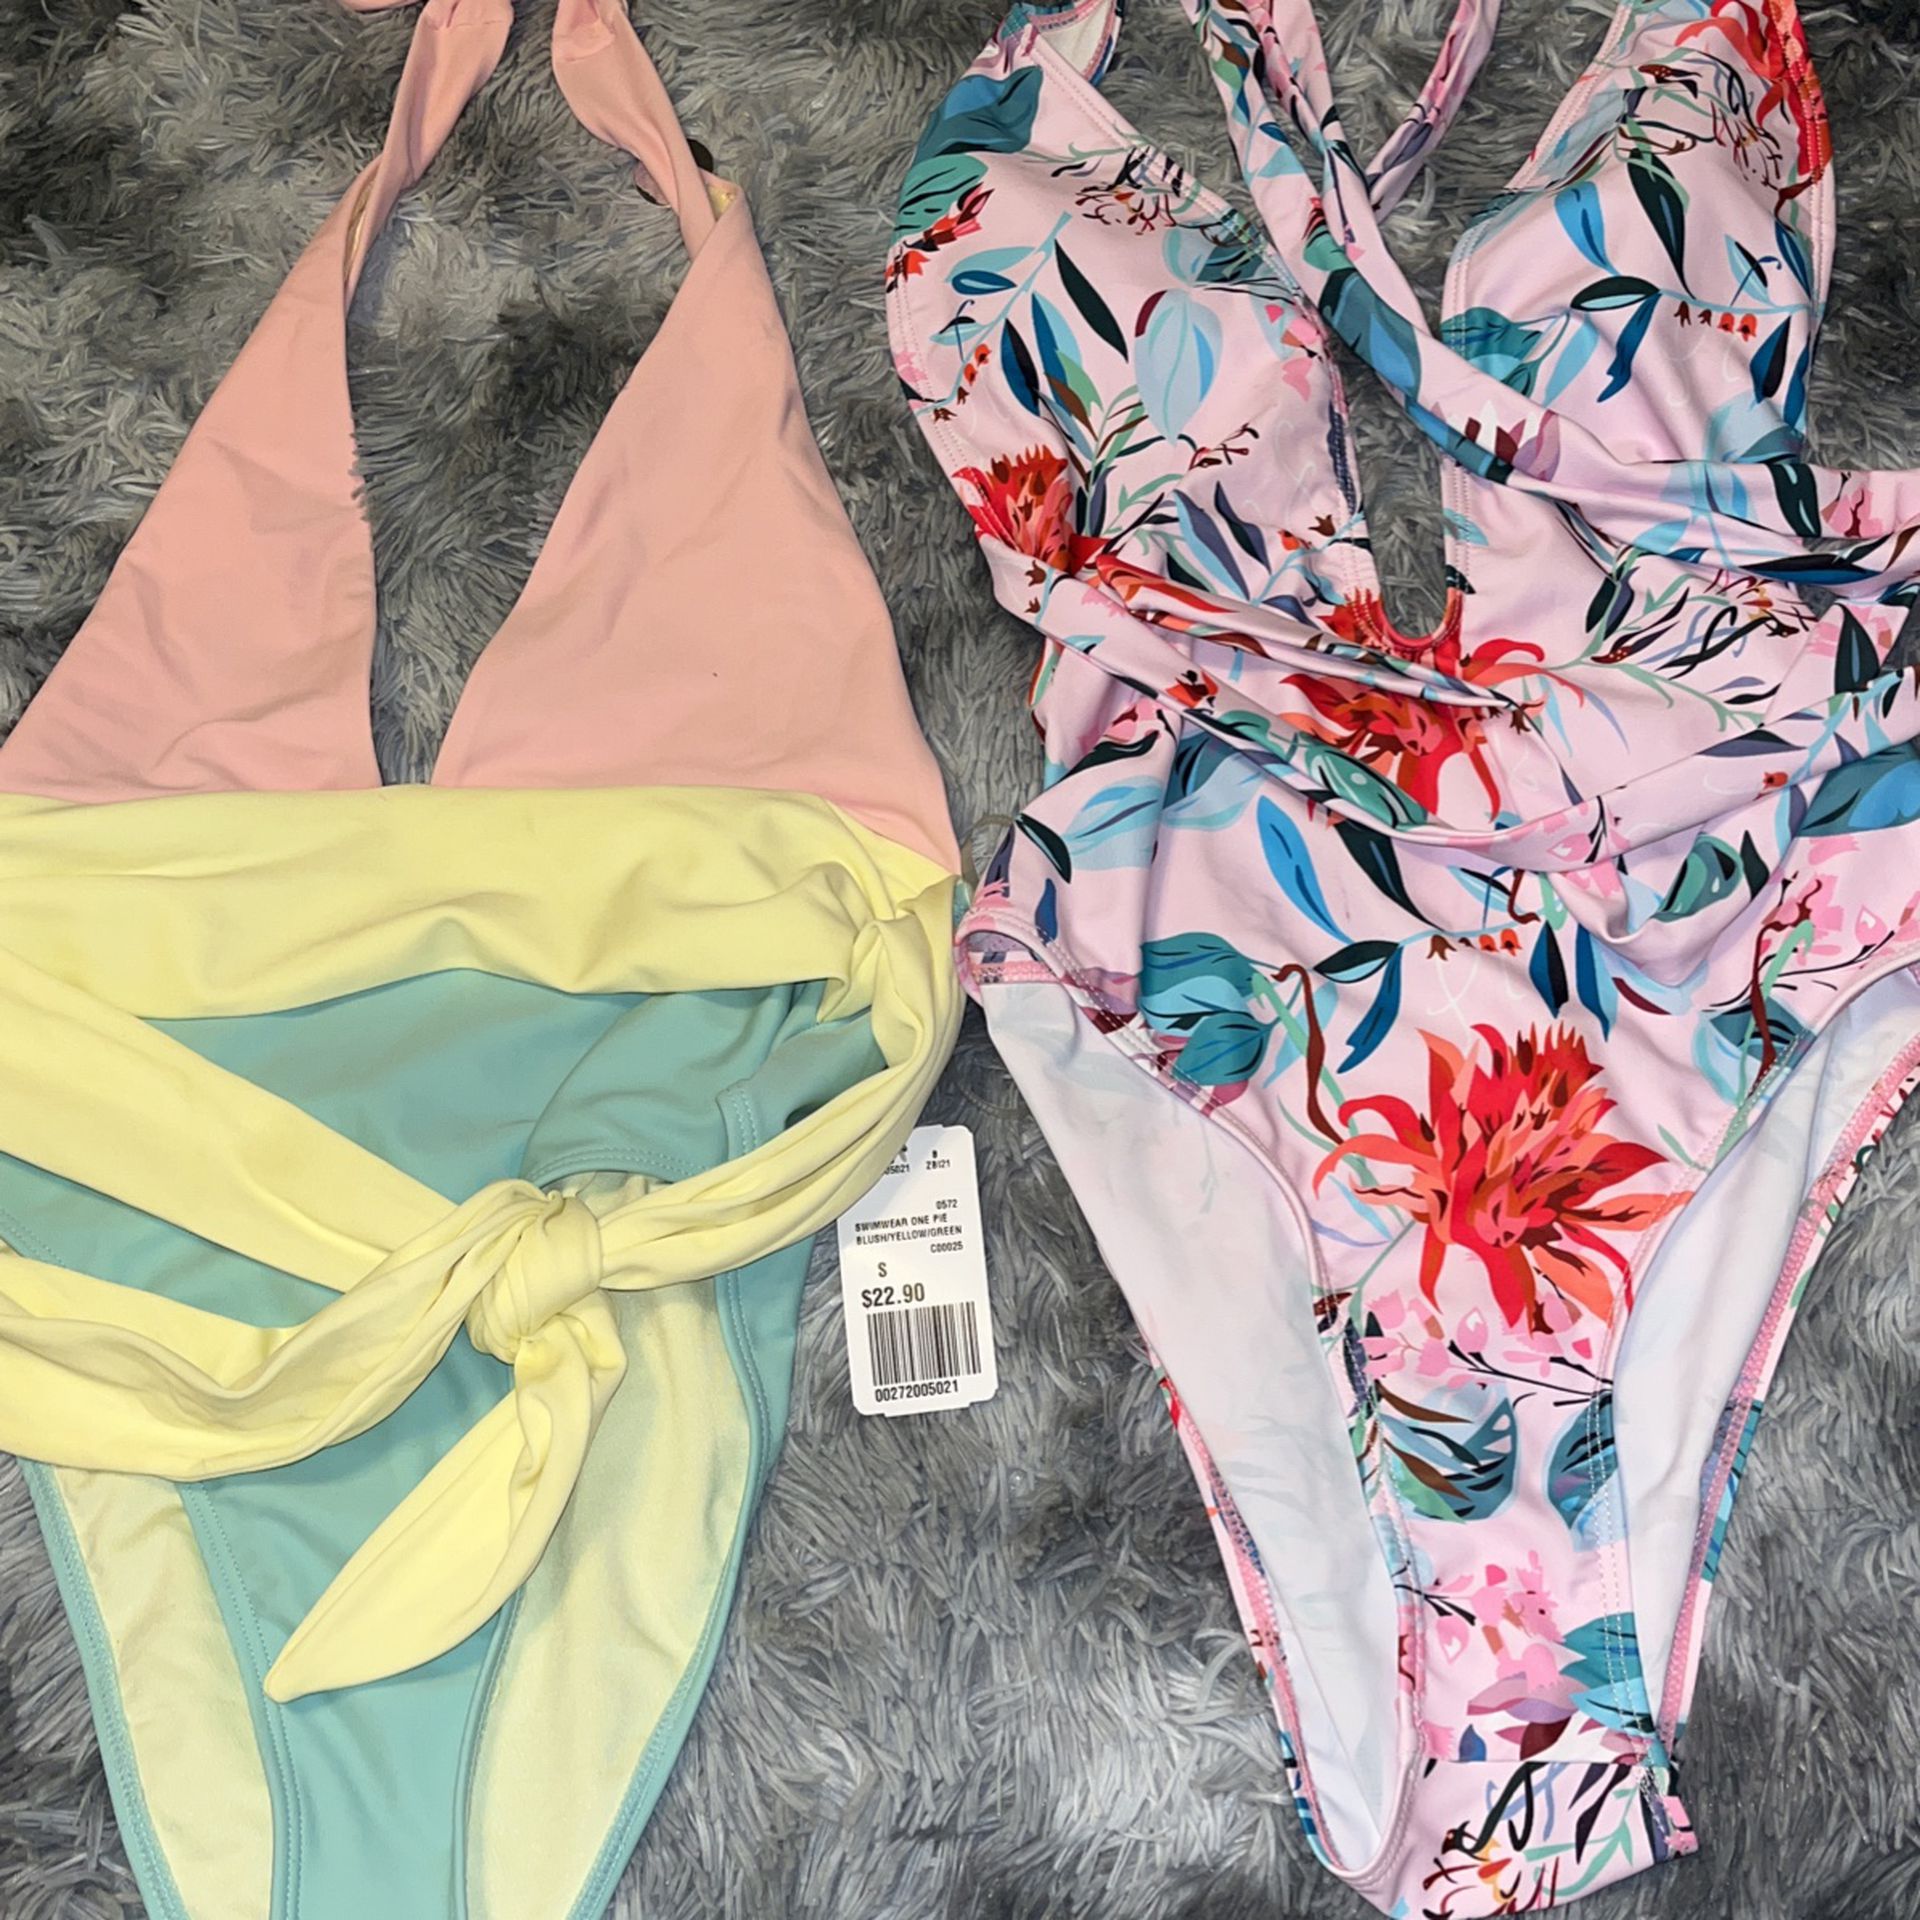 Any 1 Bathing Suits Colorful Bikinis NEW